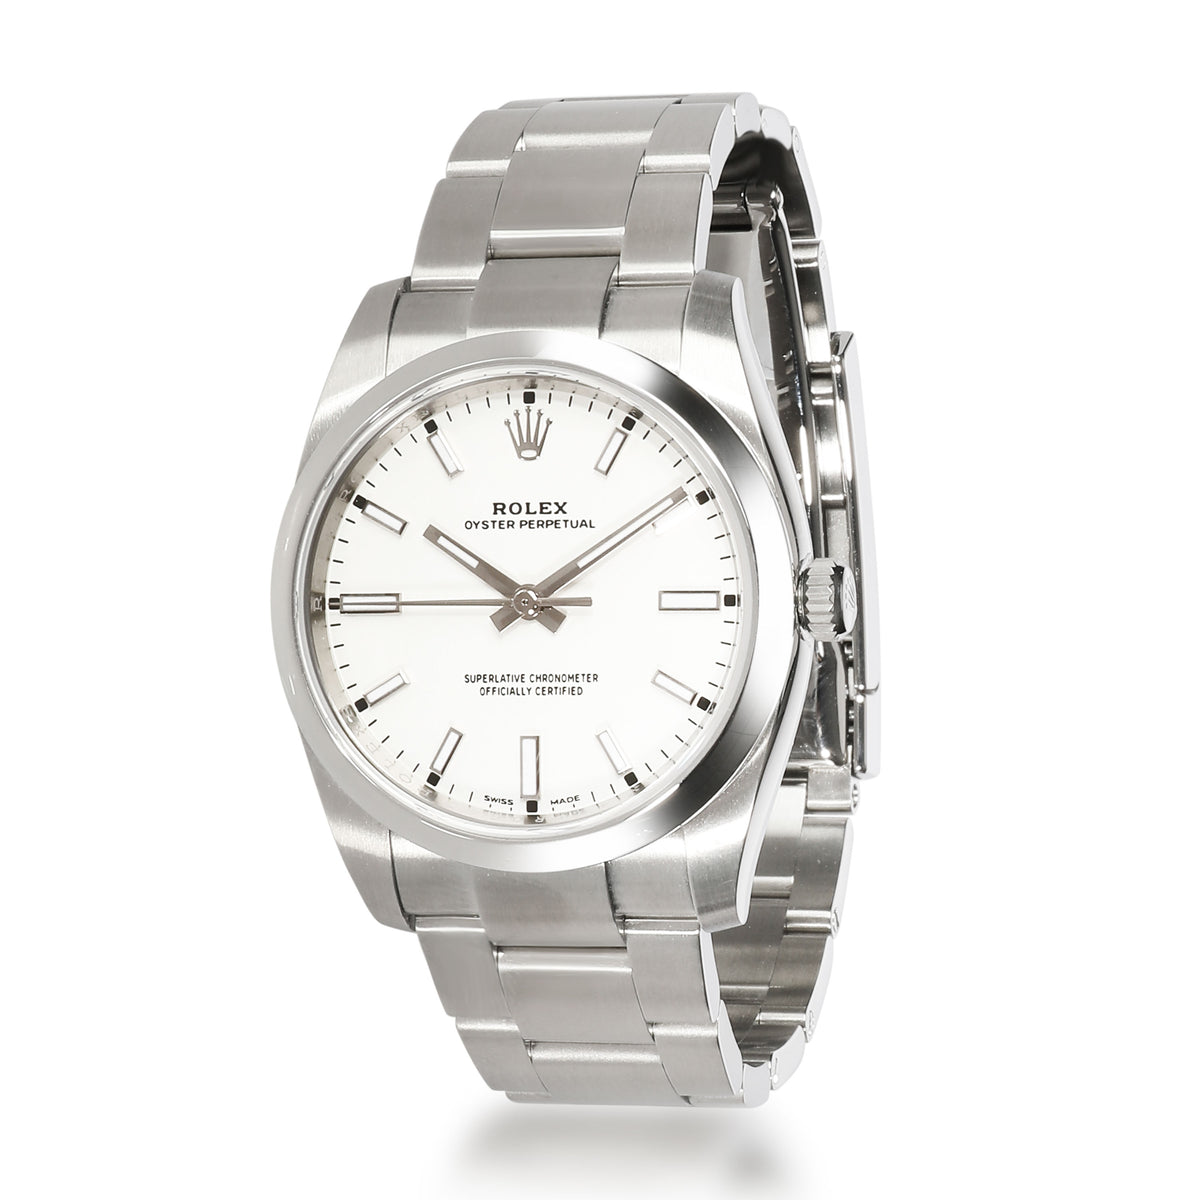 Rolex Oyster Perpetual 114200 Men's Watch in  Stainless Steel